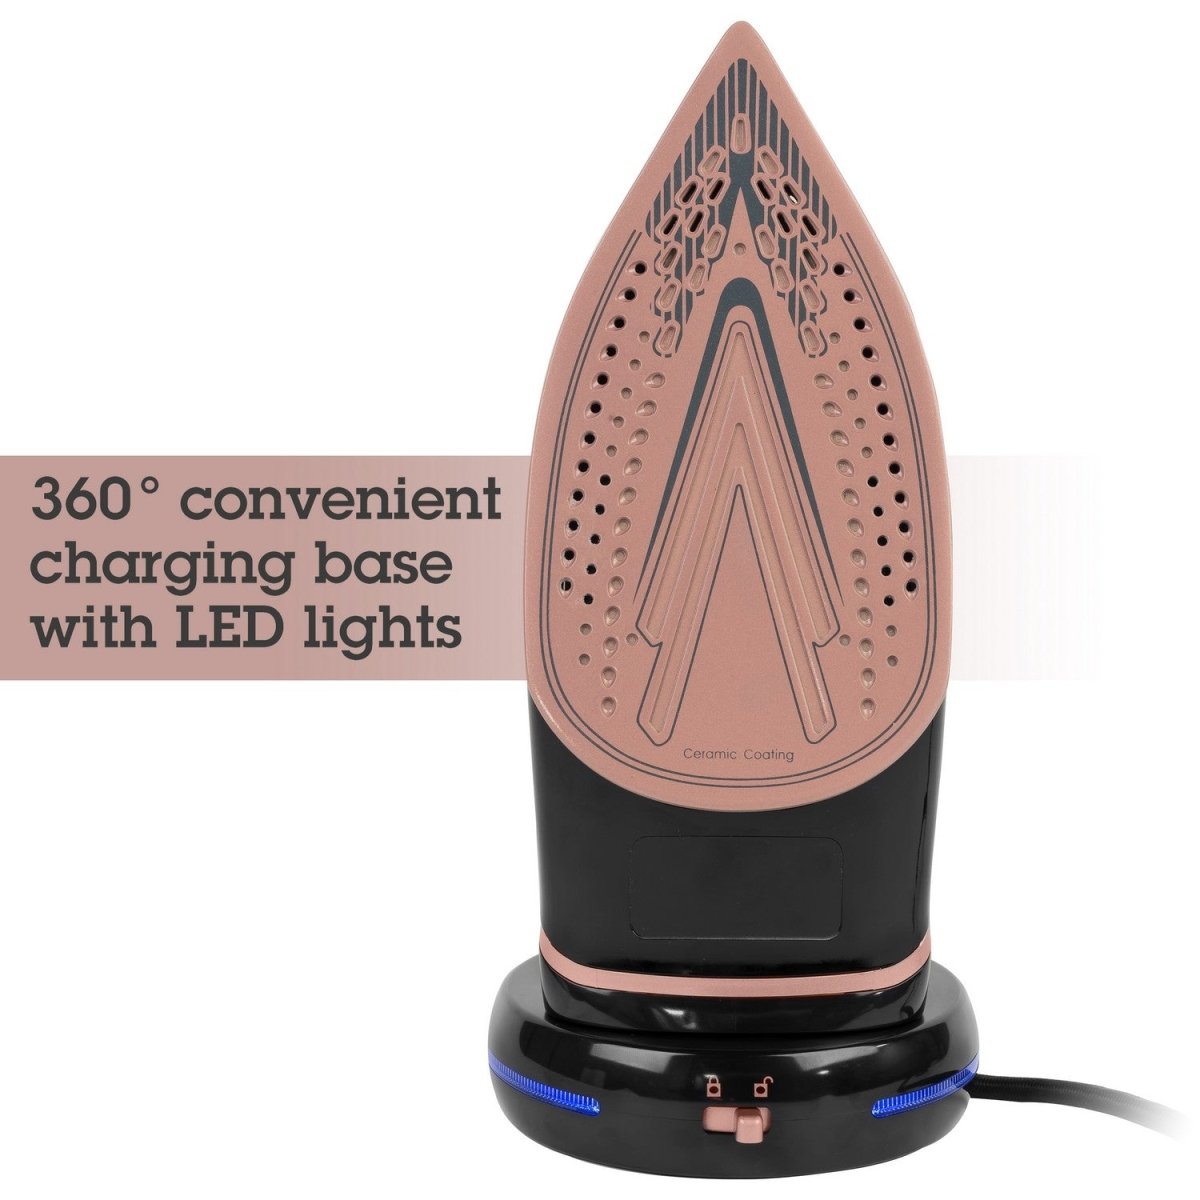 Beldray 2in1 Rose Gold Edition Cordless Iron - Bonnypack